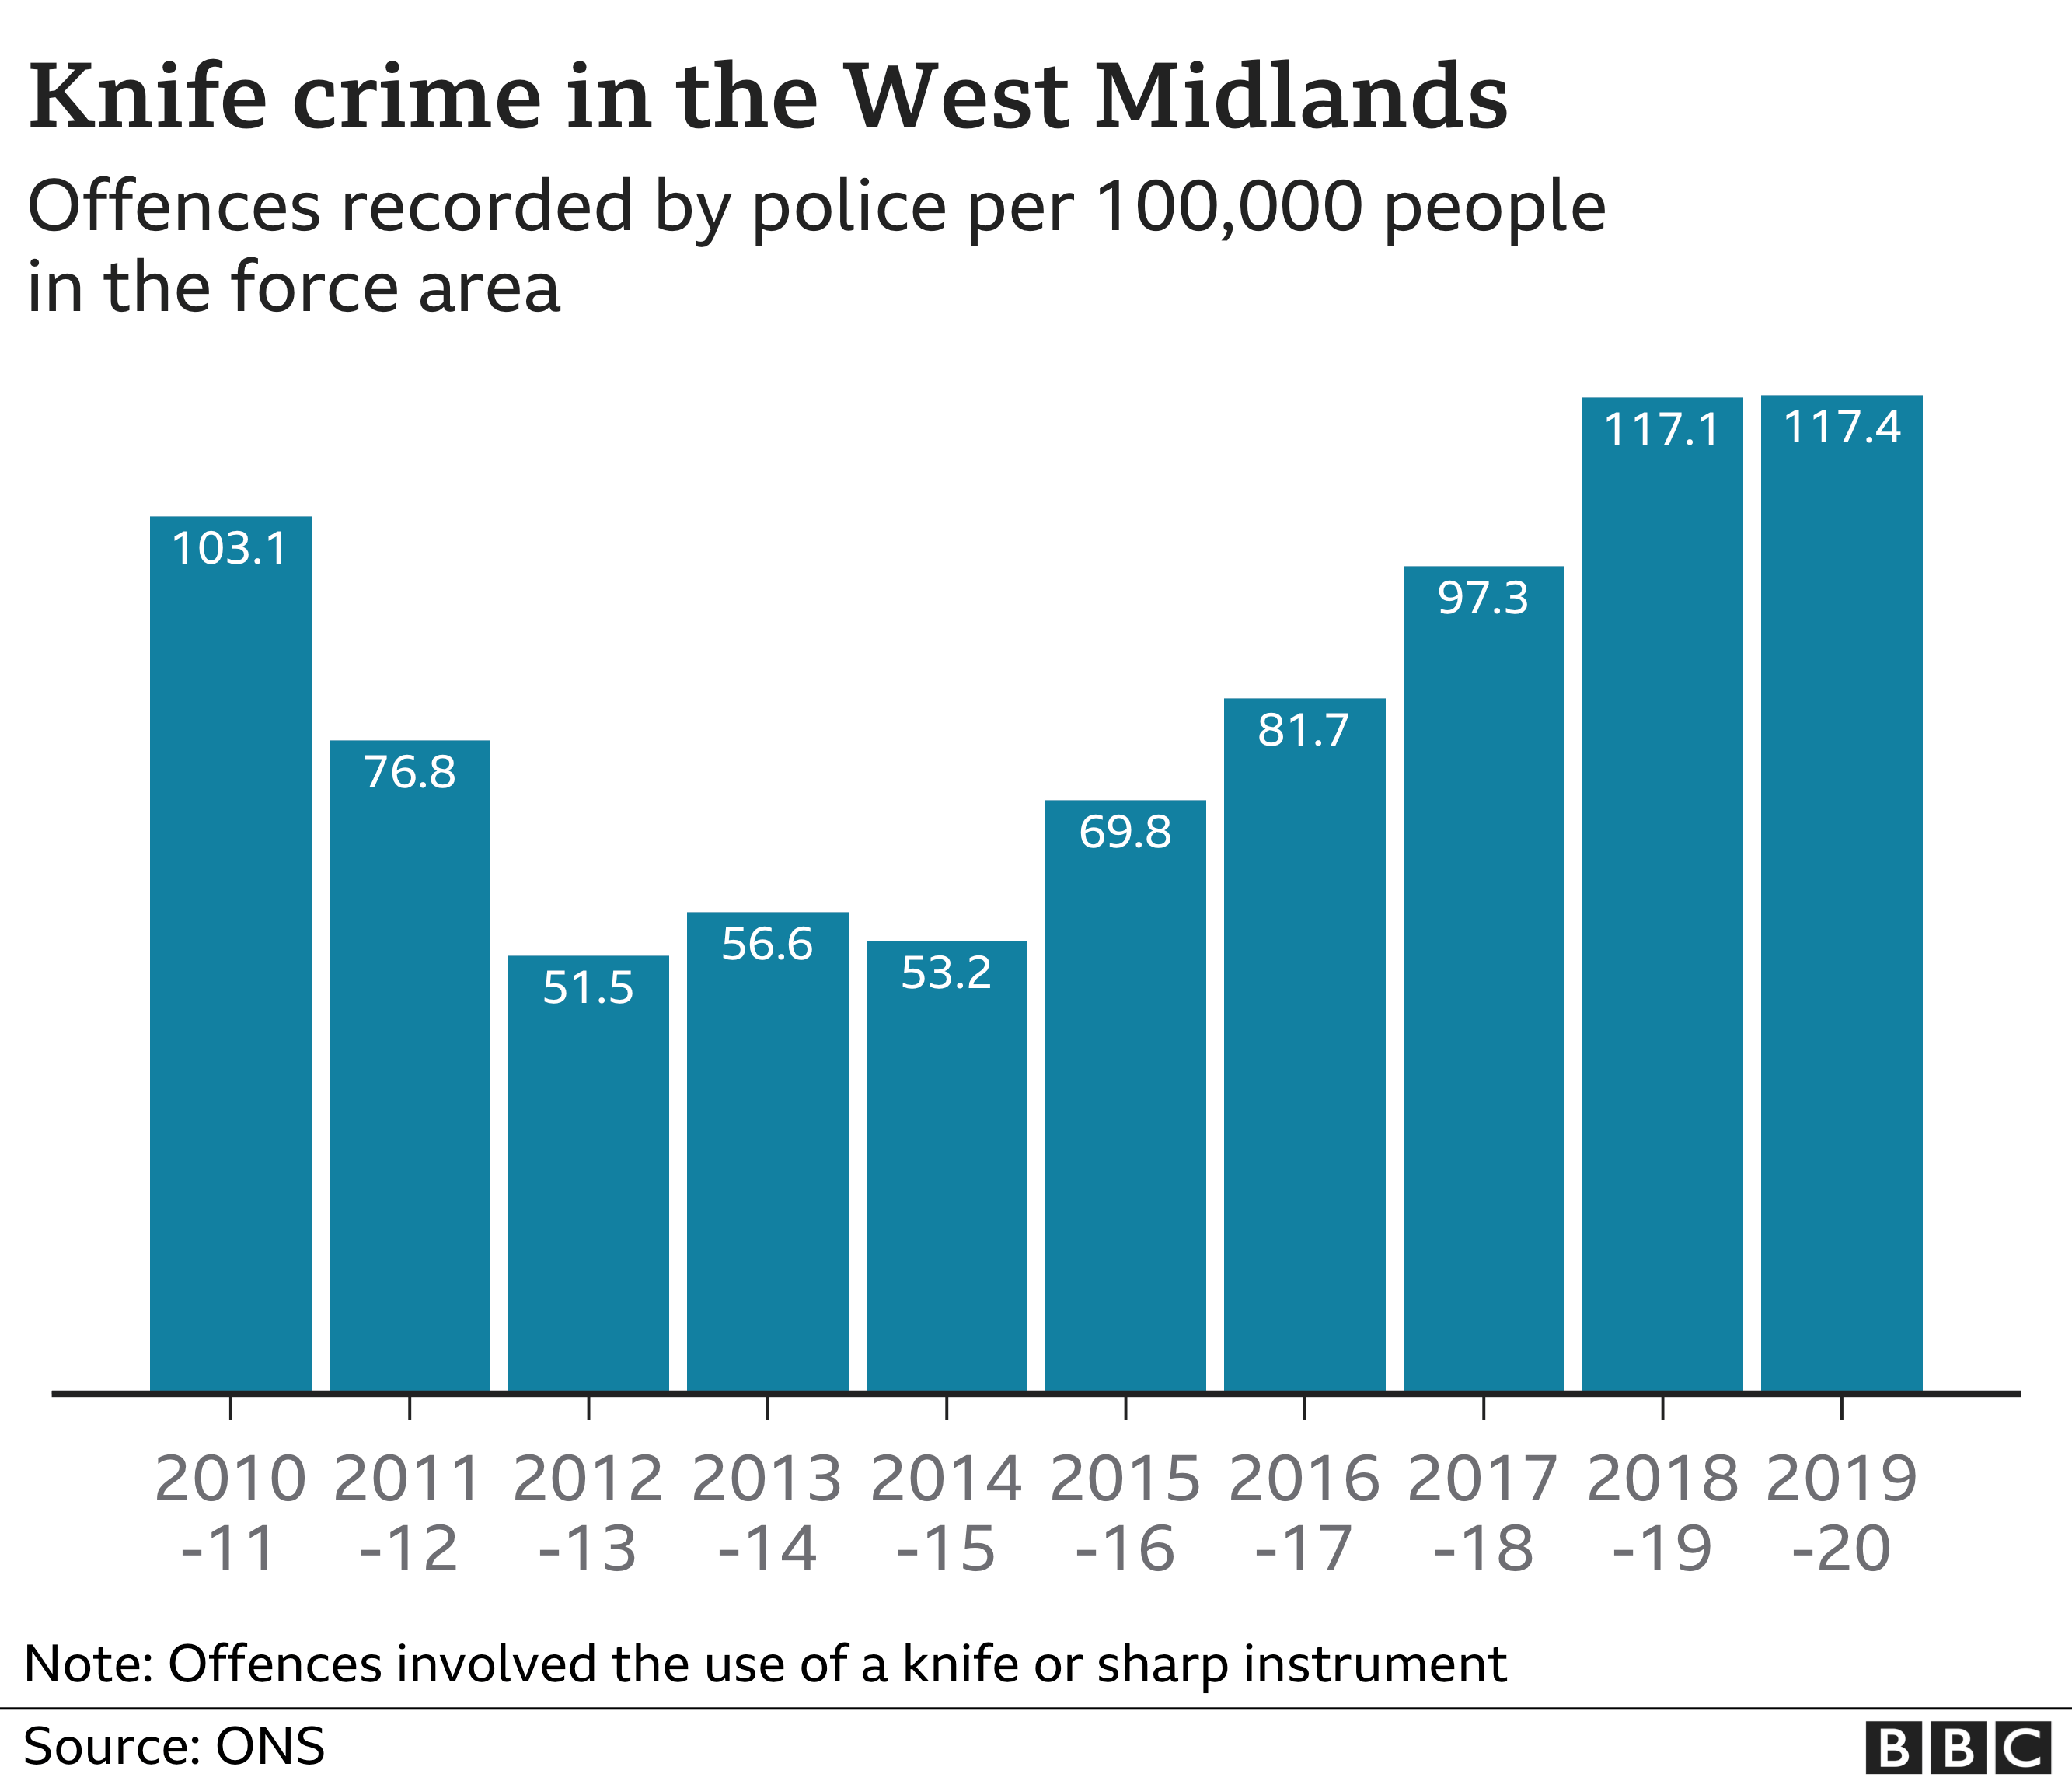 Knife crime in the West Midlands between 2010 and 2020